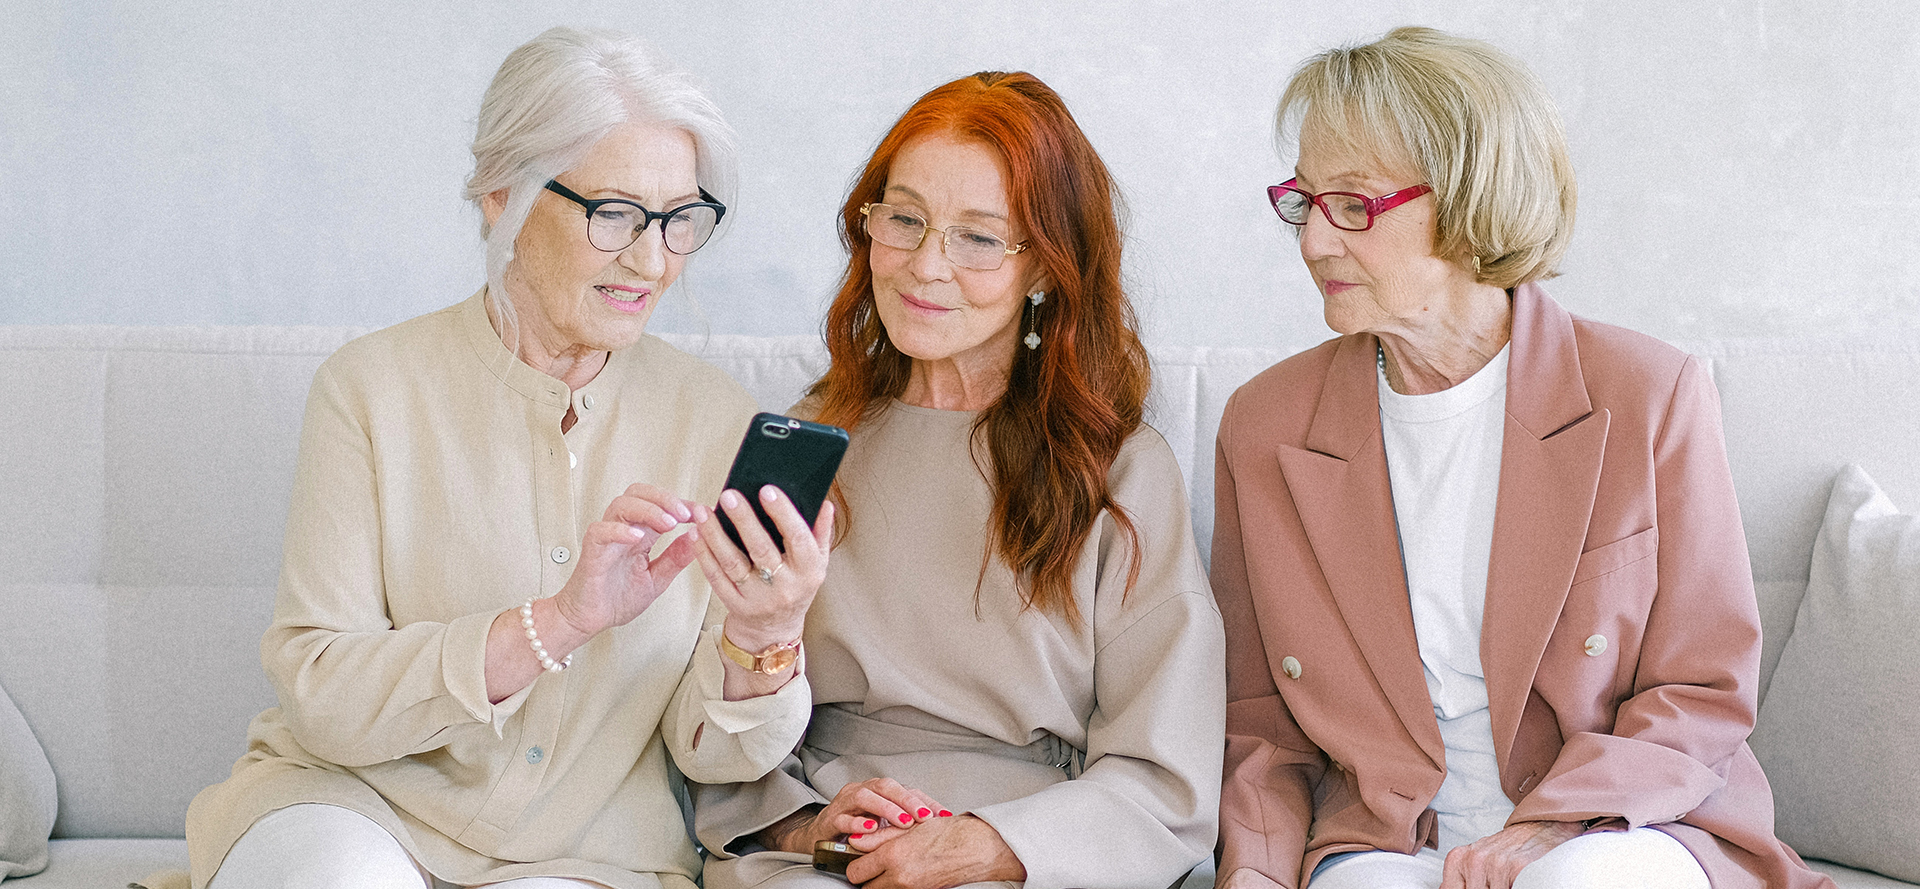 Grandmothers are looking for their soulmate on online dating sites.